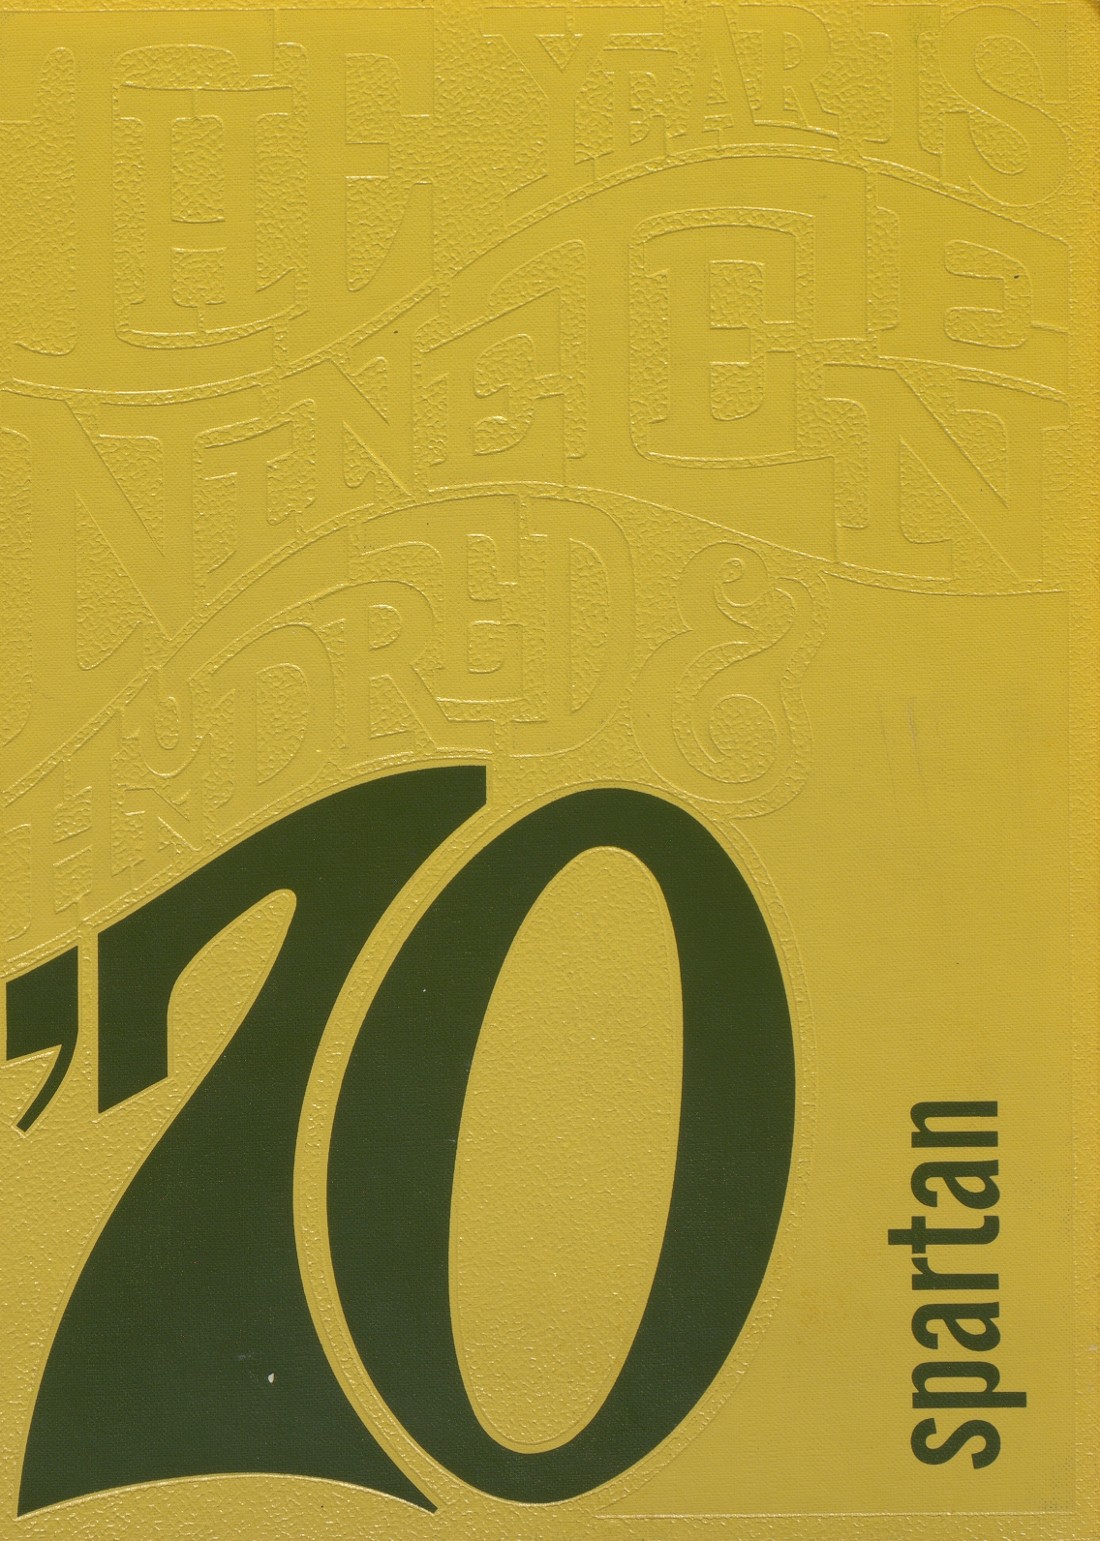 1970 yearbook from Spearfish High School from Spearfish, South Dakota